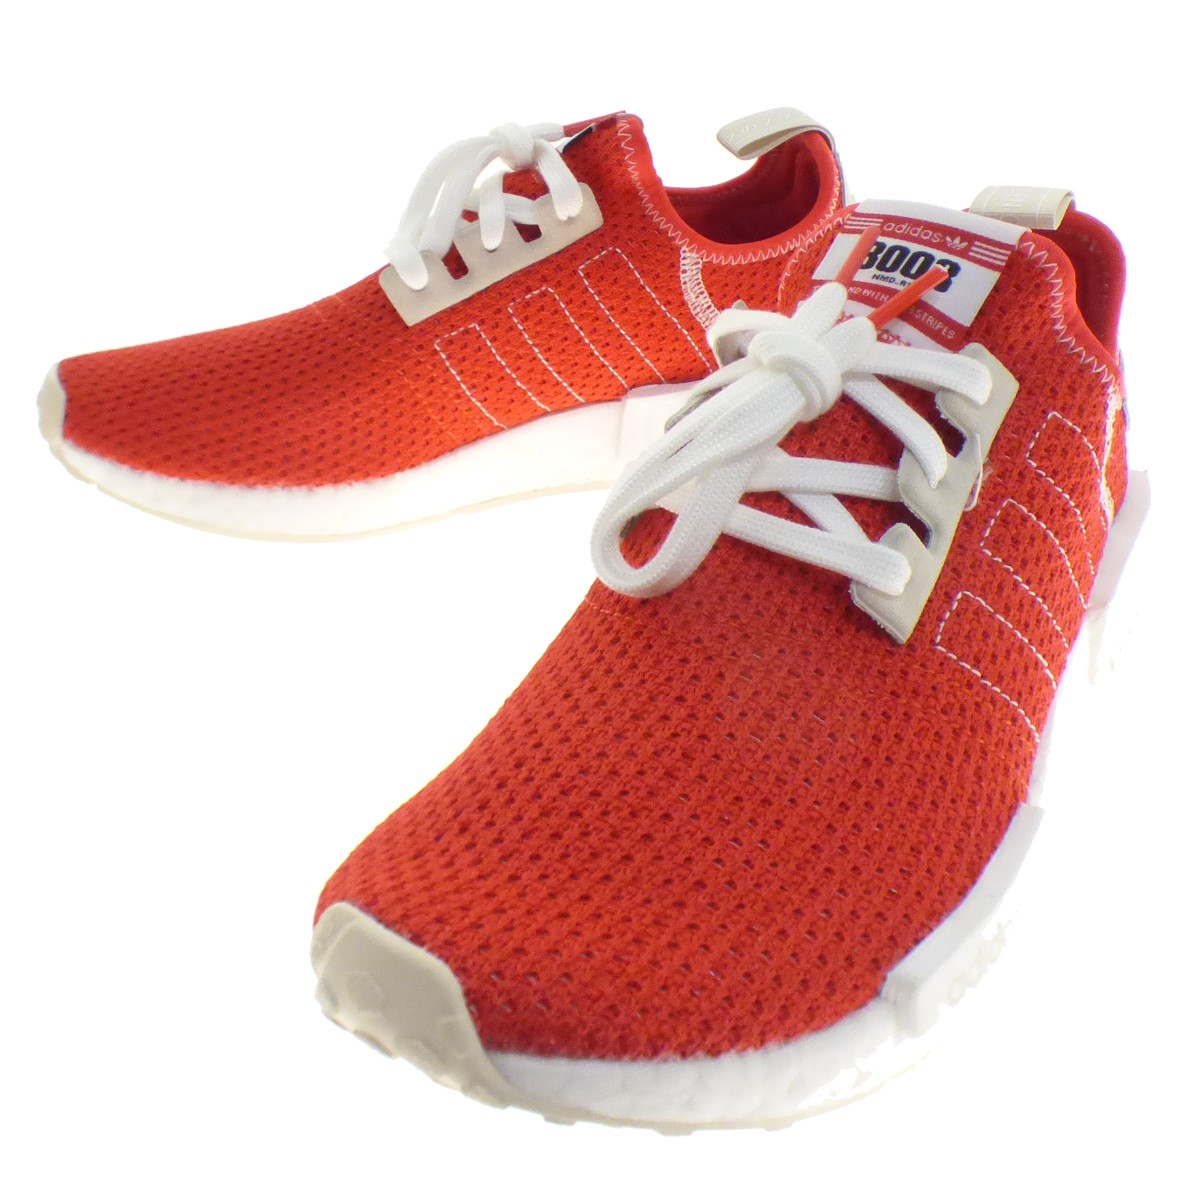 adidas originals NMD R1 sneakers red 